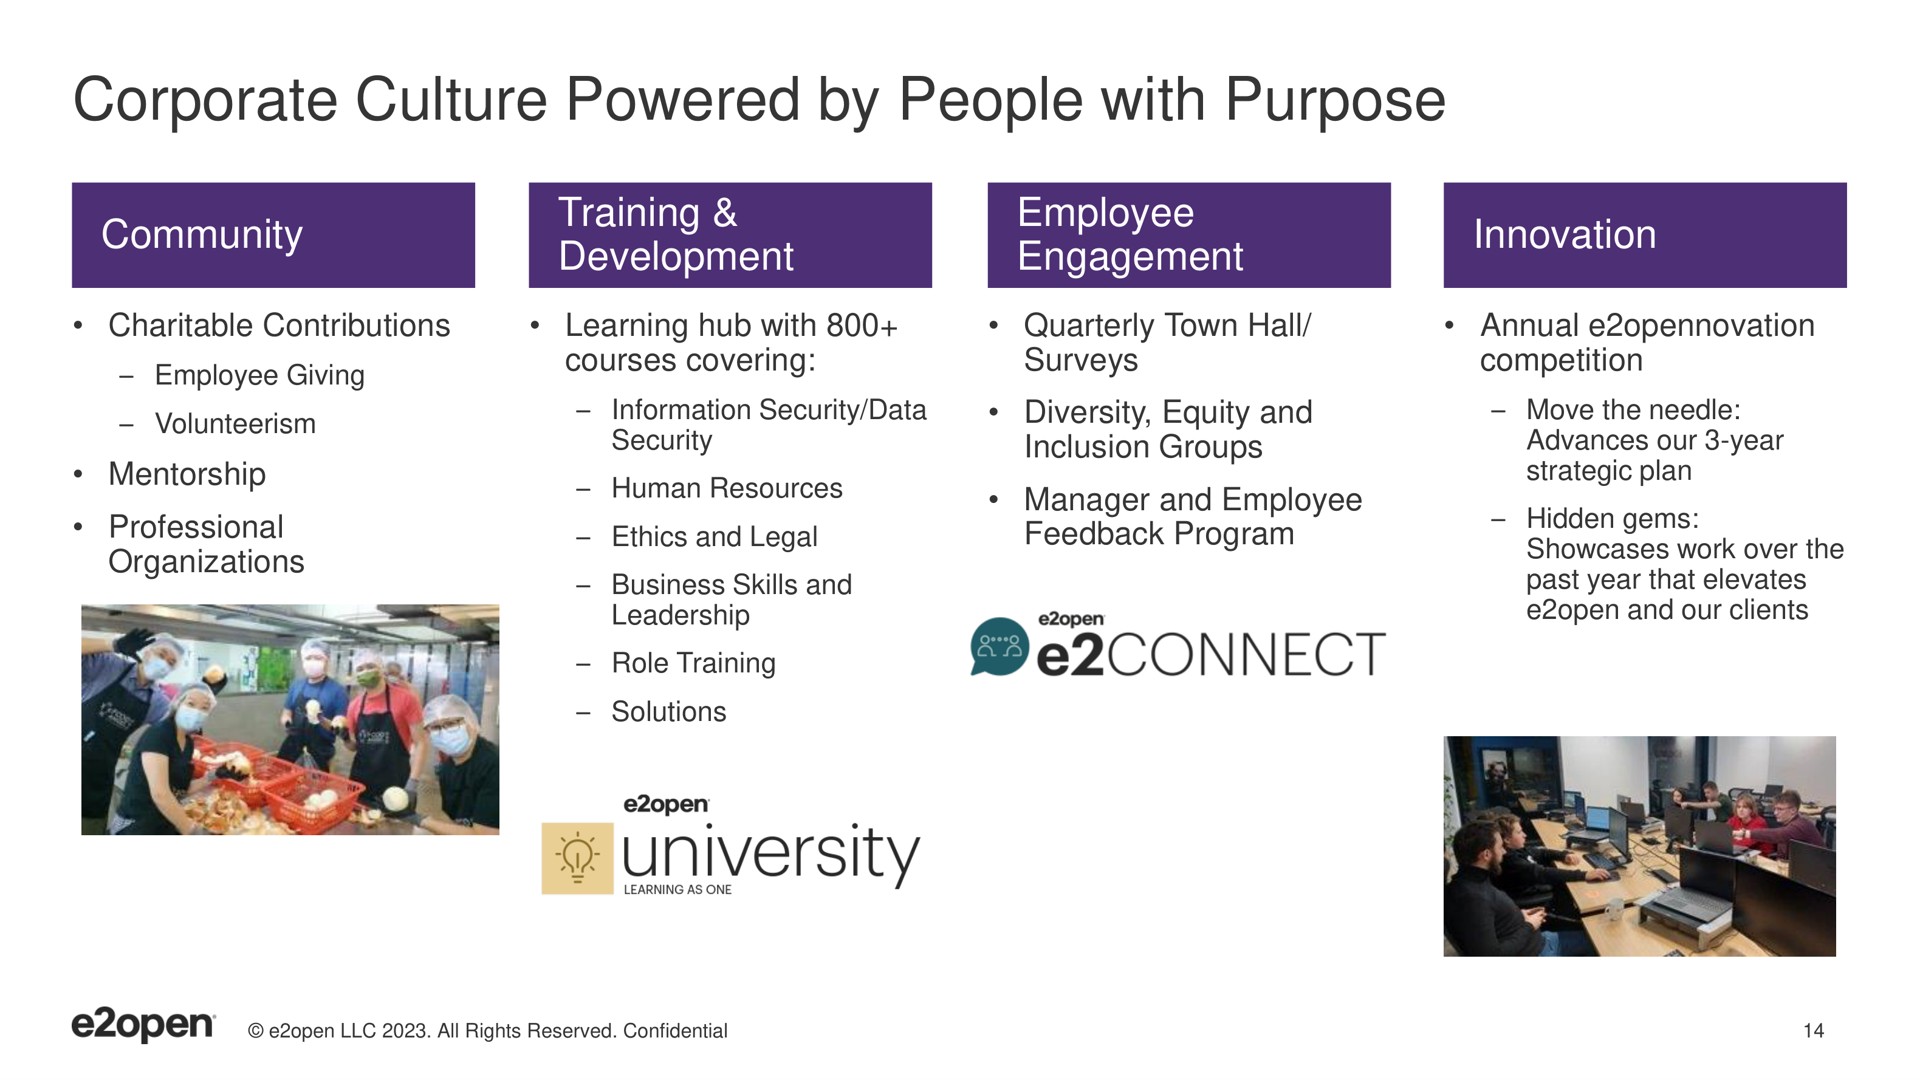 corporate culture powered by people with purpose university | E2open